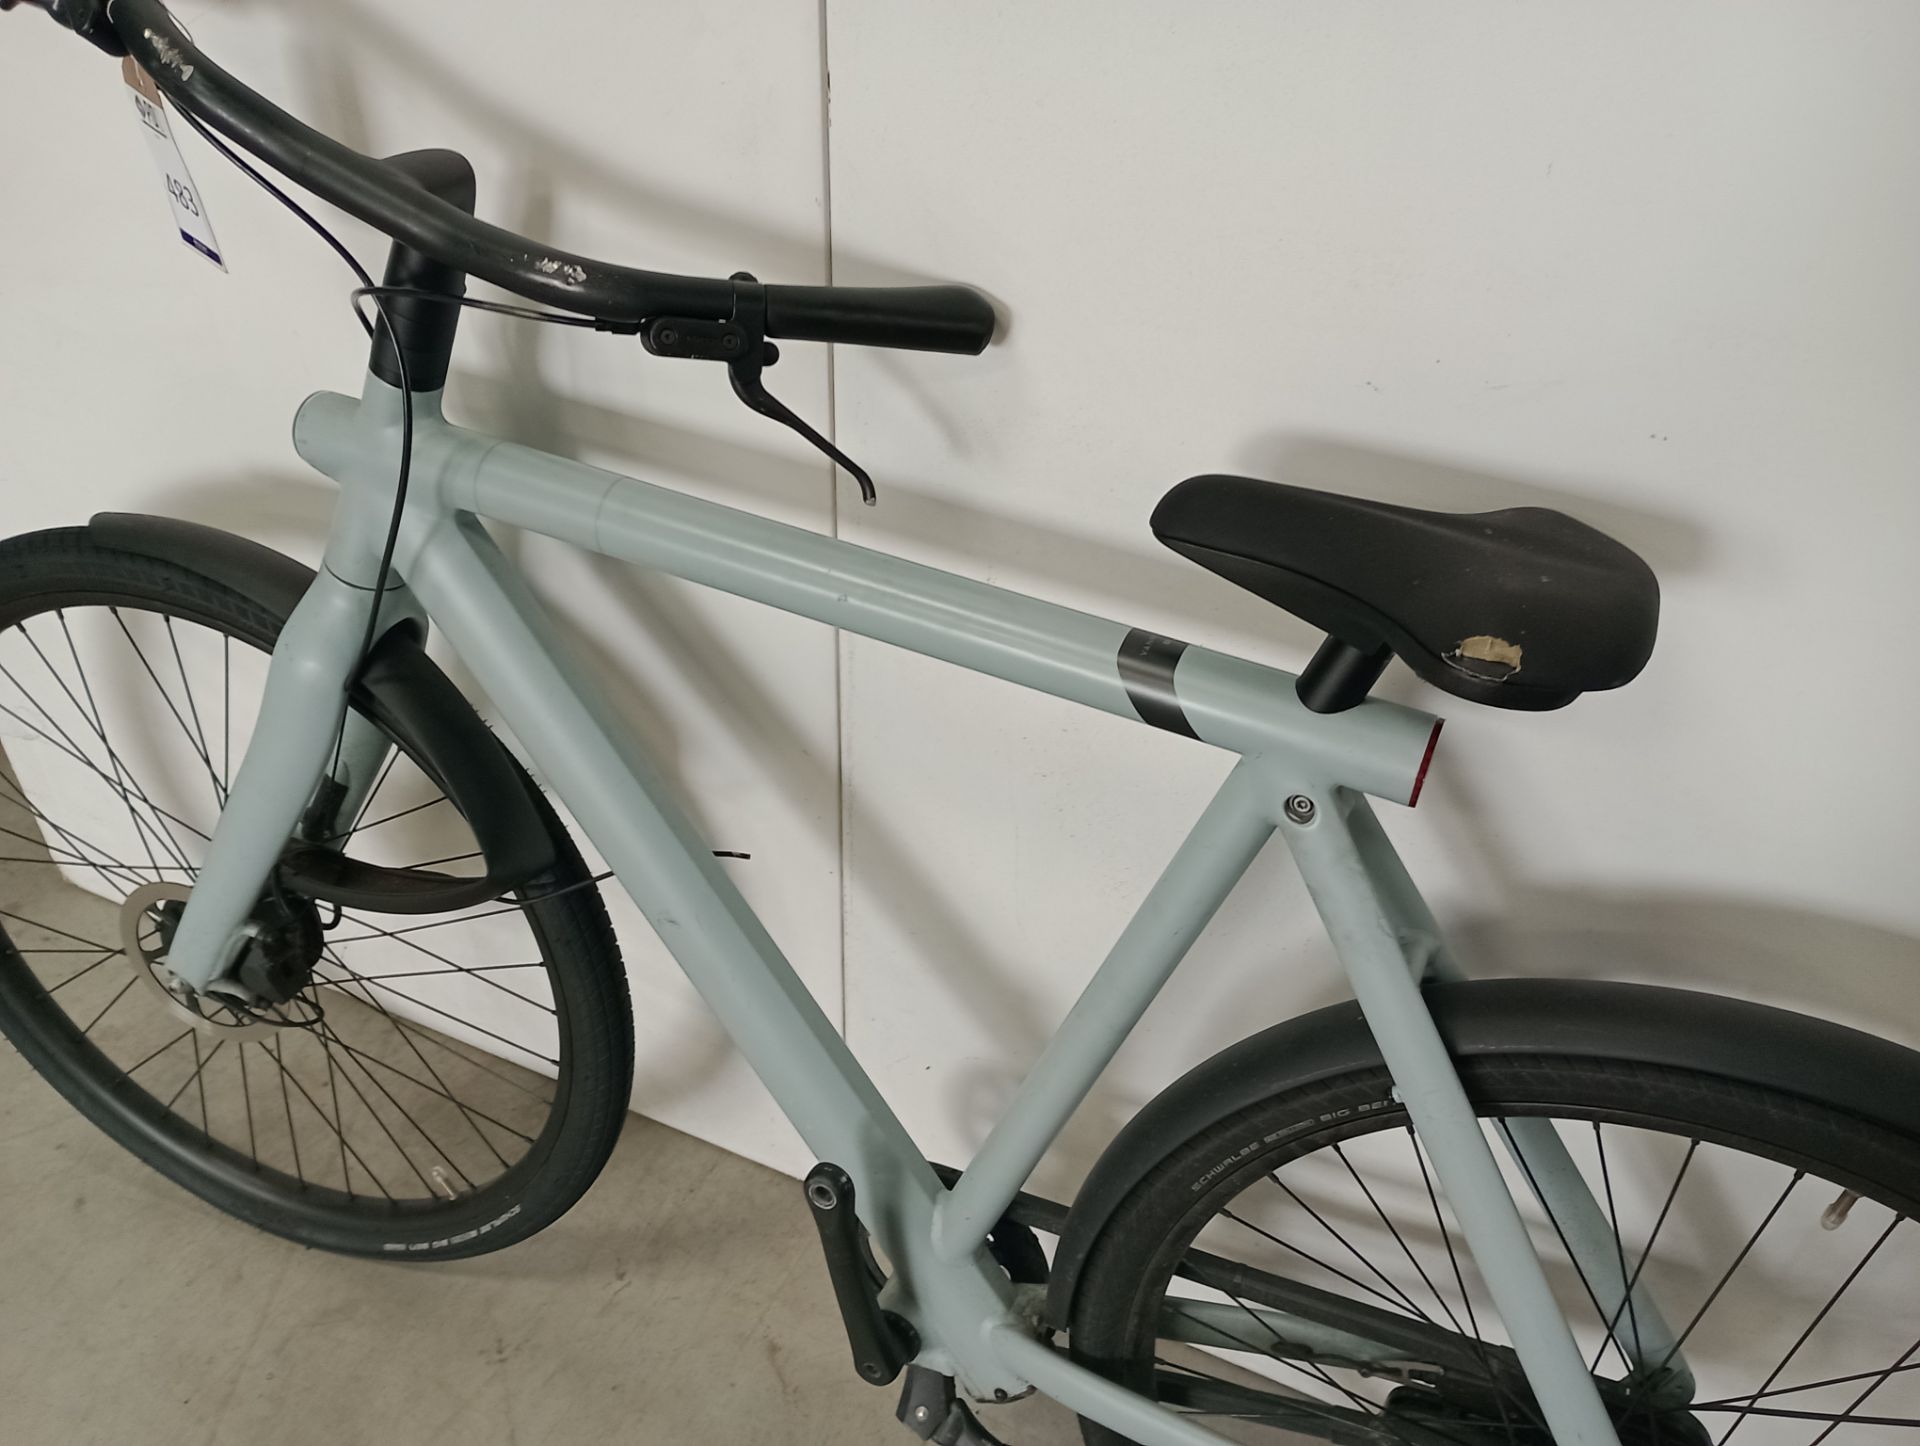 VanMoof S3 Electric Bike, Frame Number ASY1032412 (NOT ROADWORTHY - FOR SPARES ONLY) (No codes - Image 2 of 3